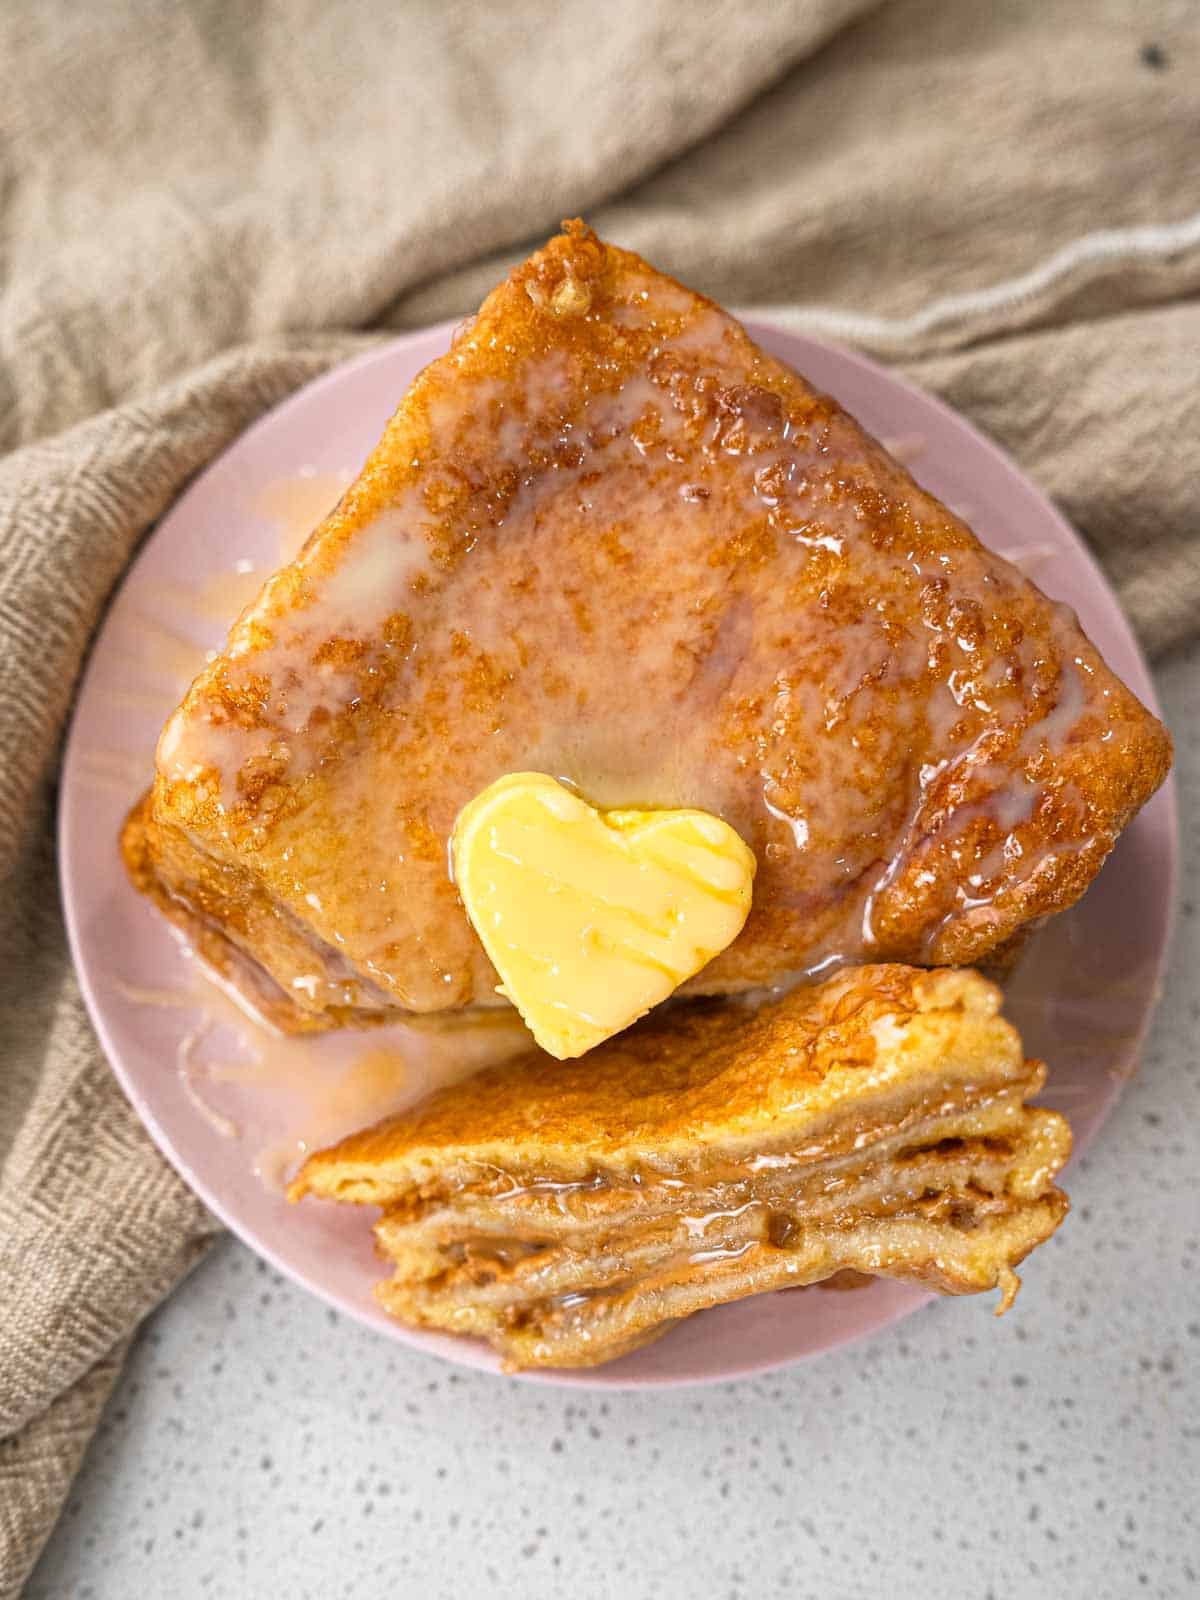 Hong kong french toast served with condensed milk and butter